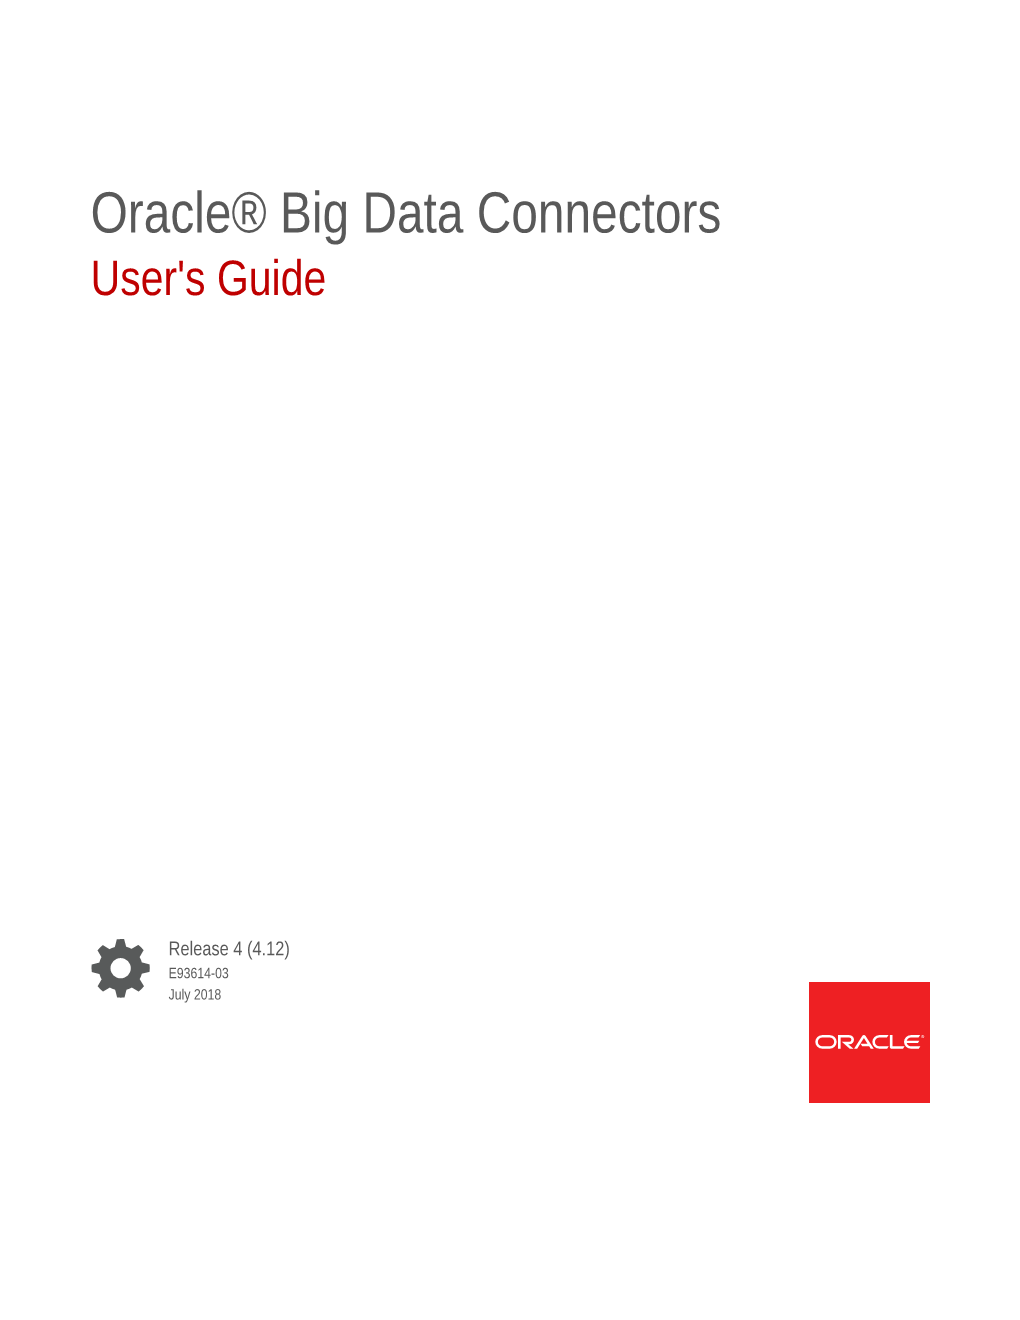 Oracle® Big Data Connectors User's Guide